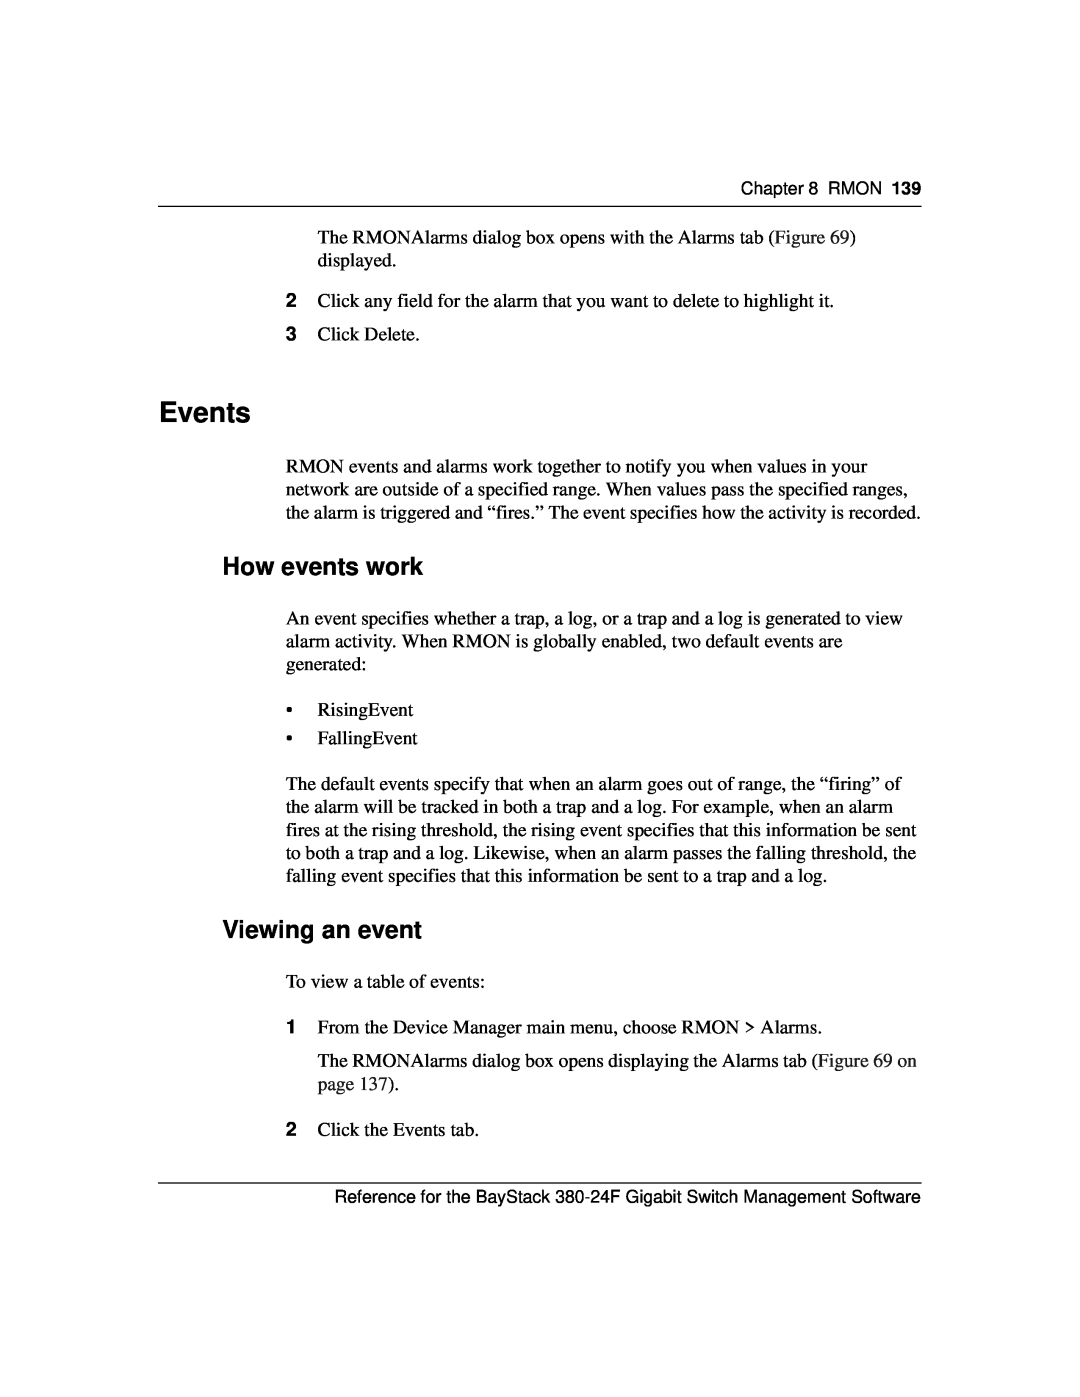 Nortel Networks 214393-A manual Events, How events work, Viewing an event 